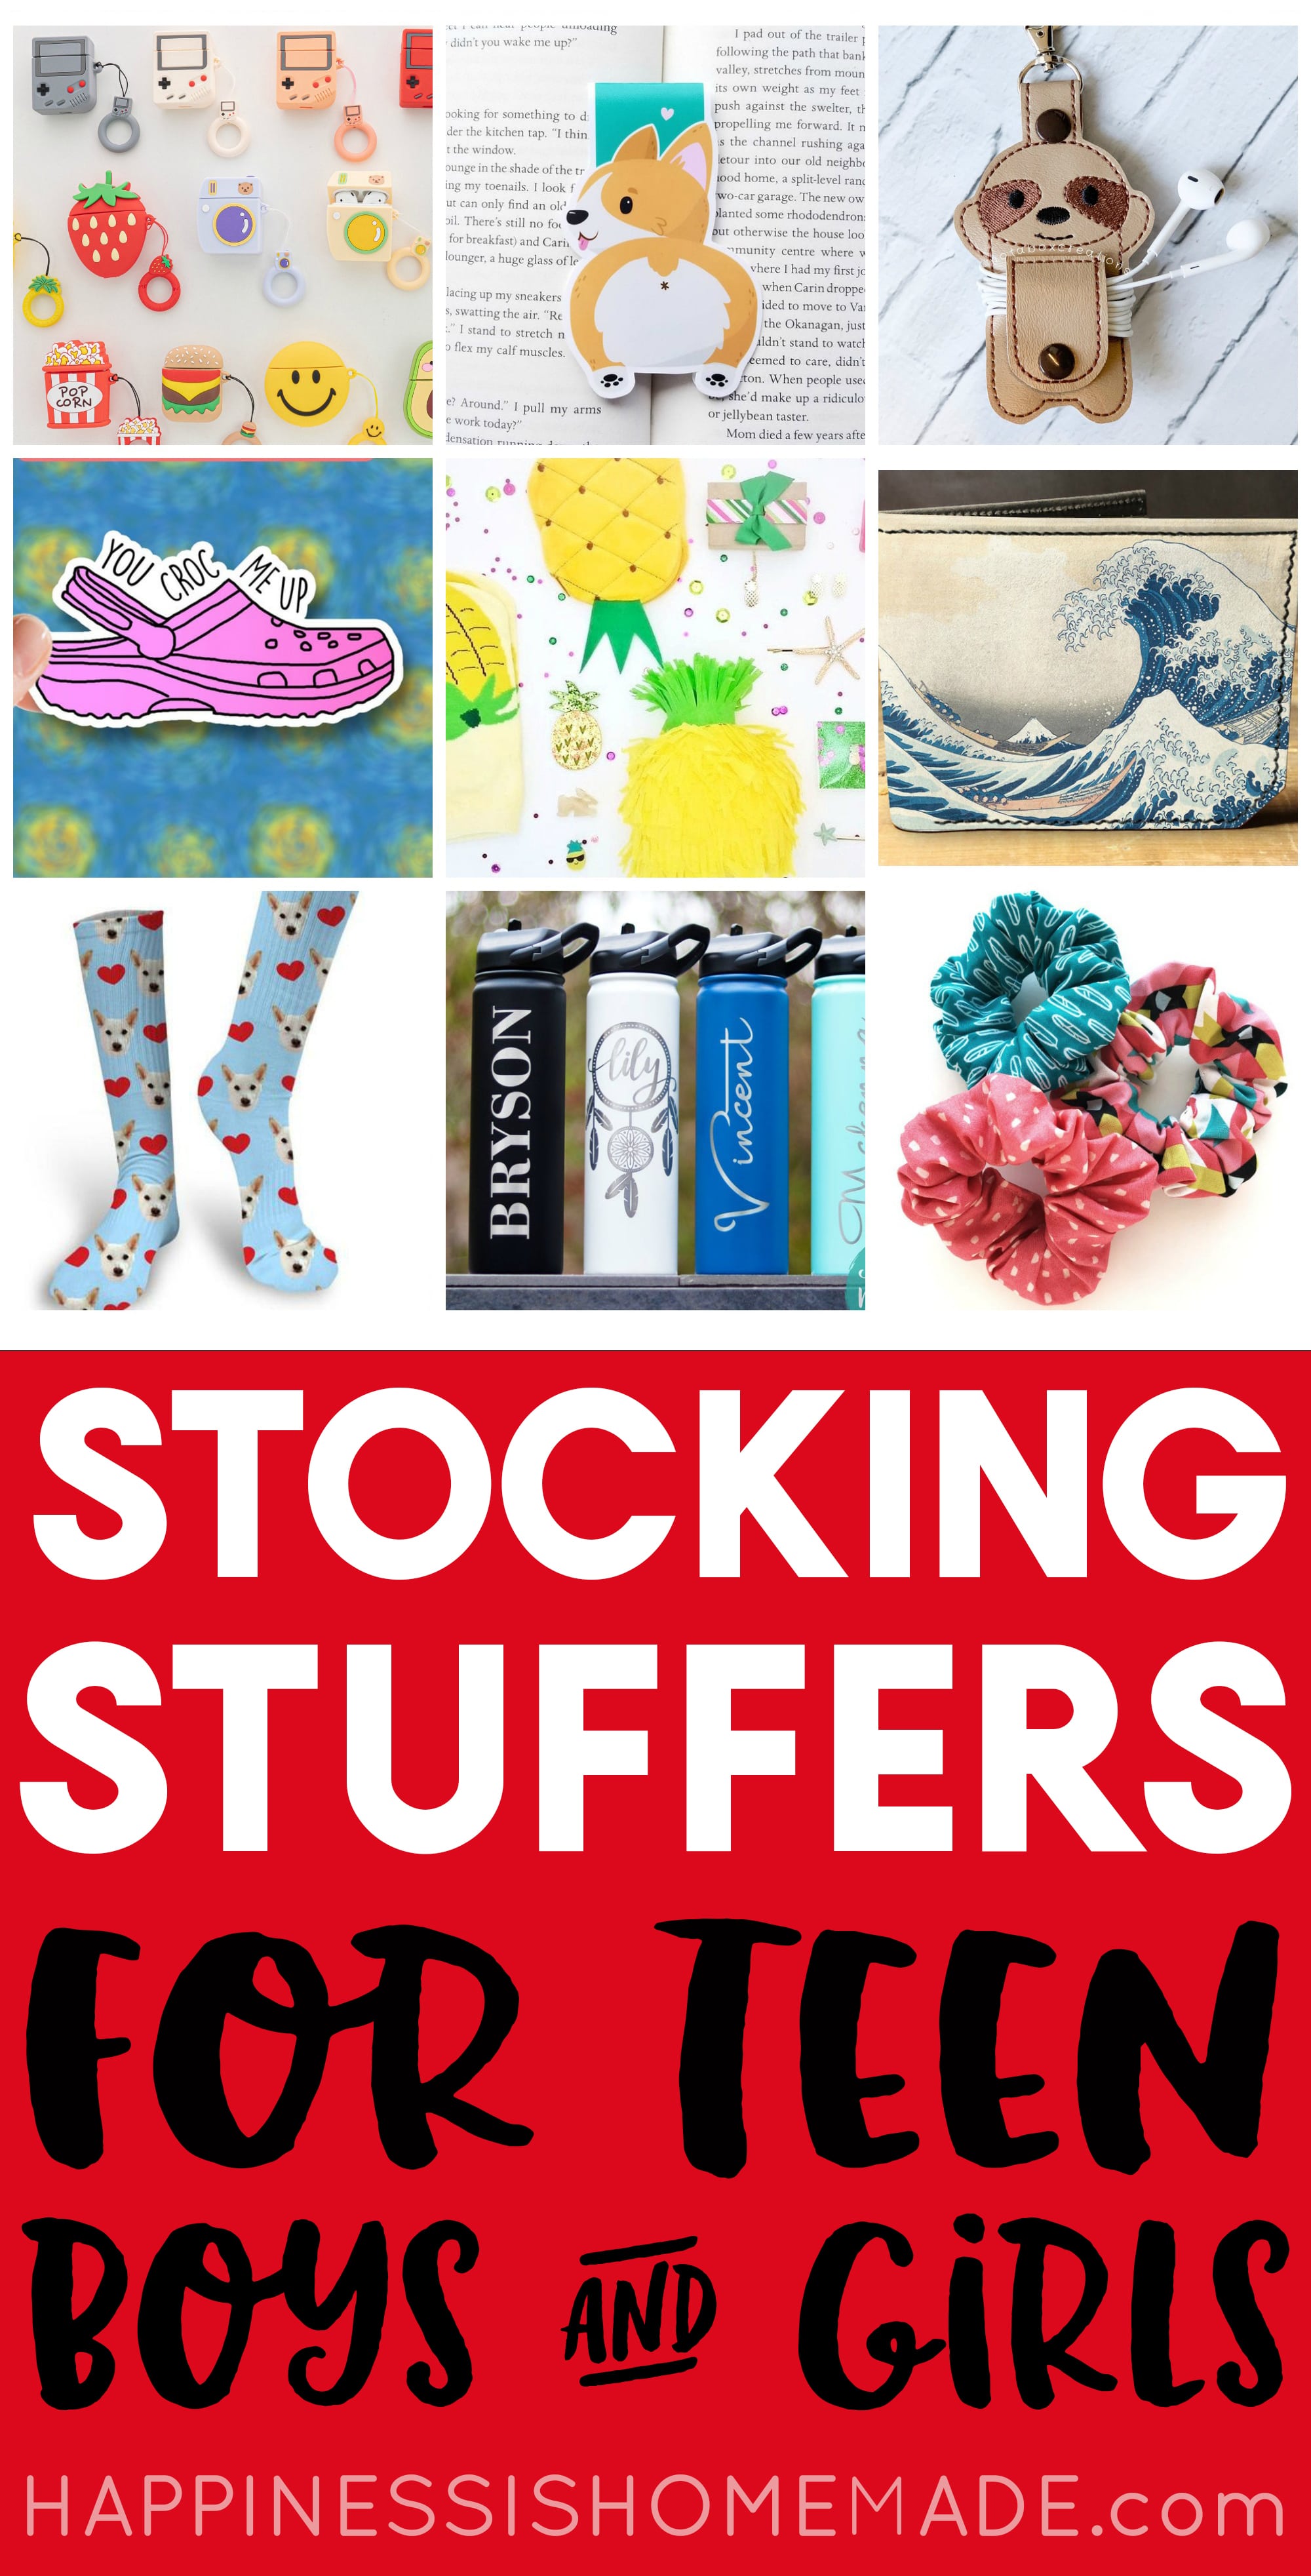 70+ Fun Stocking Stuffers for Teens and Tweens - Happiness is Homemade